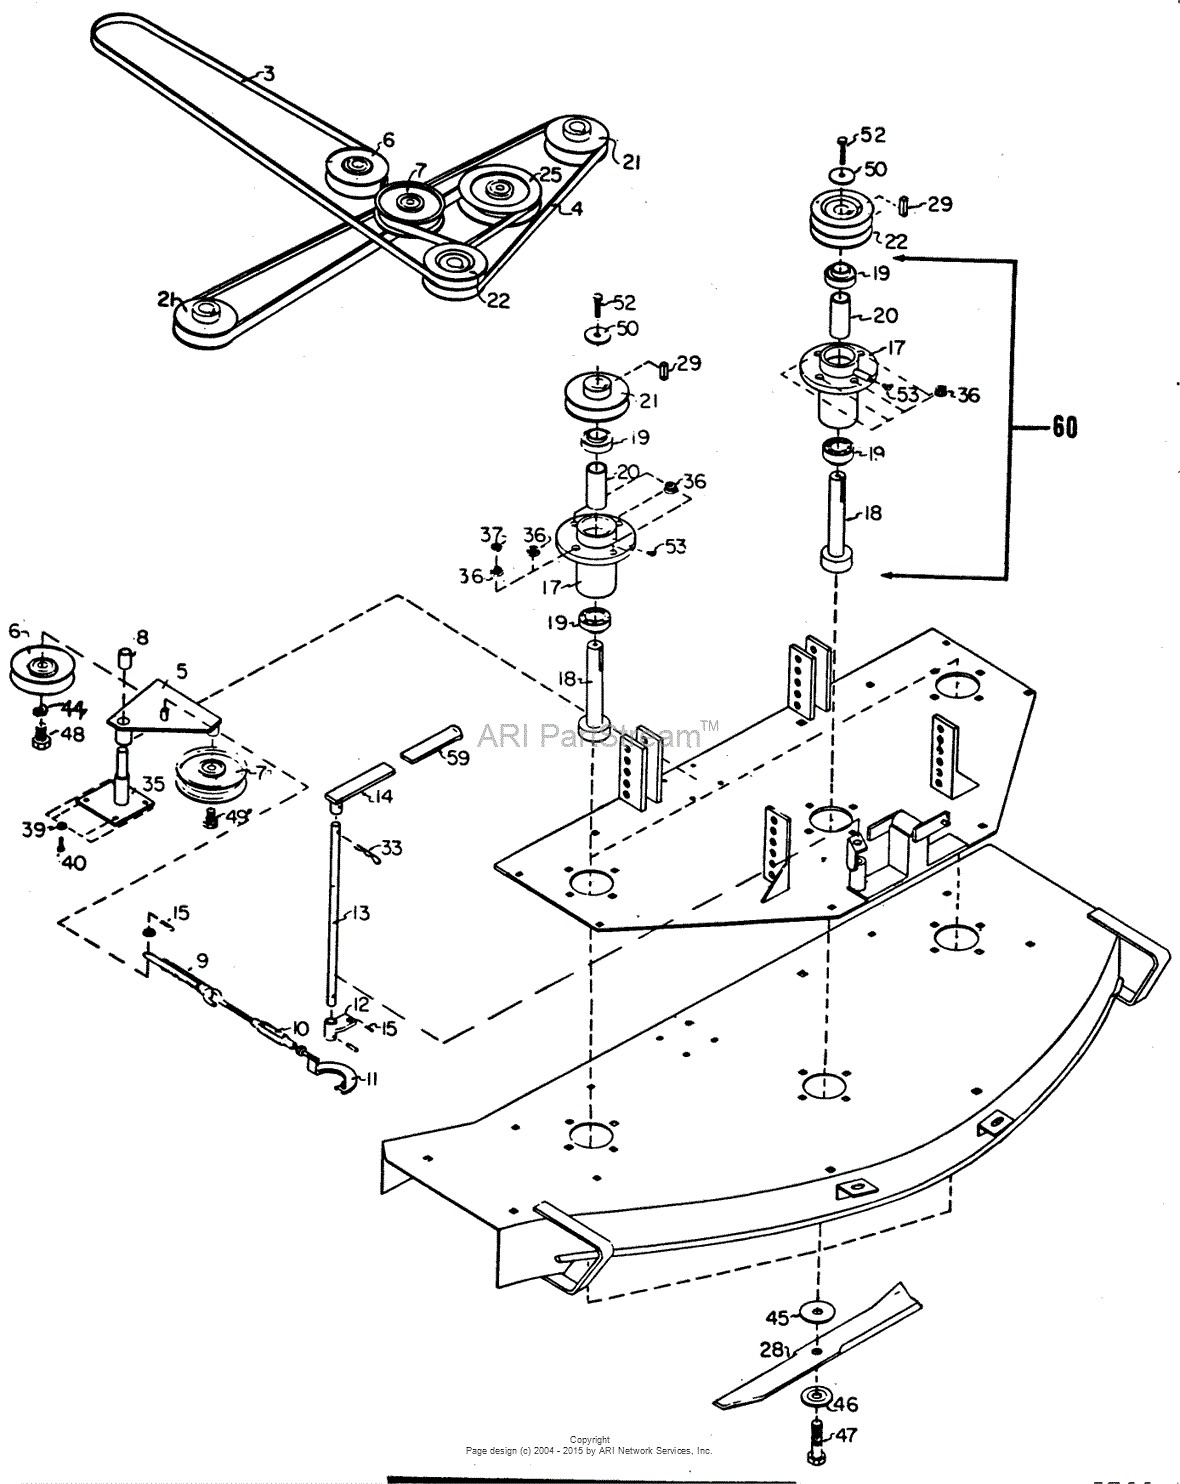 dixie chopper mower wiring diagram libraries with